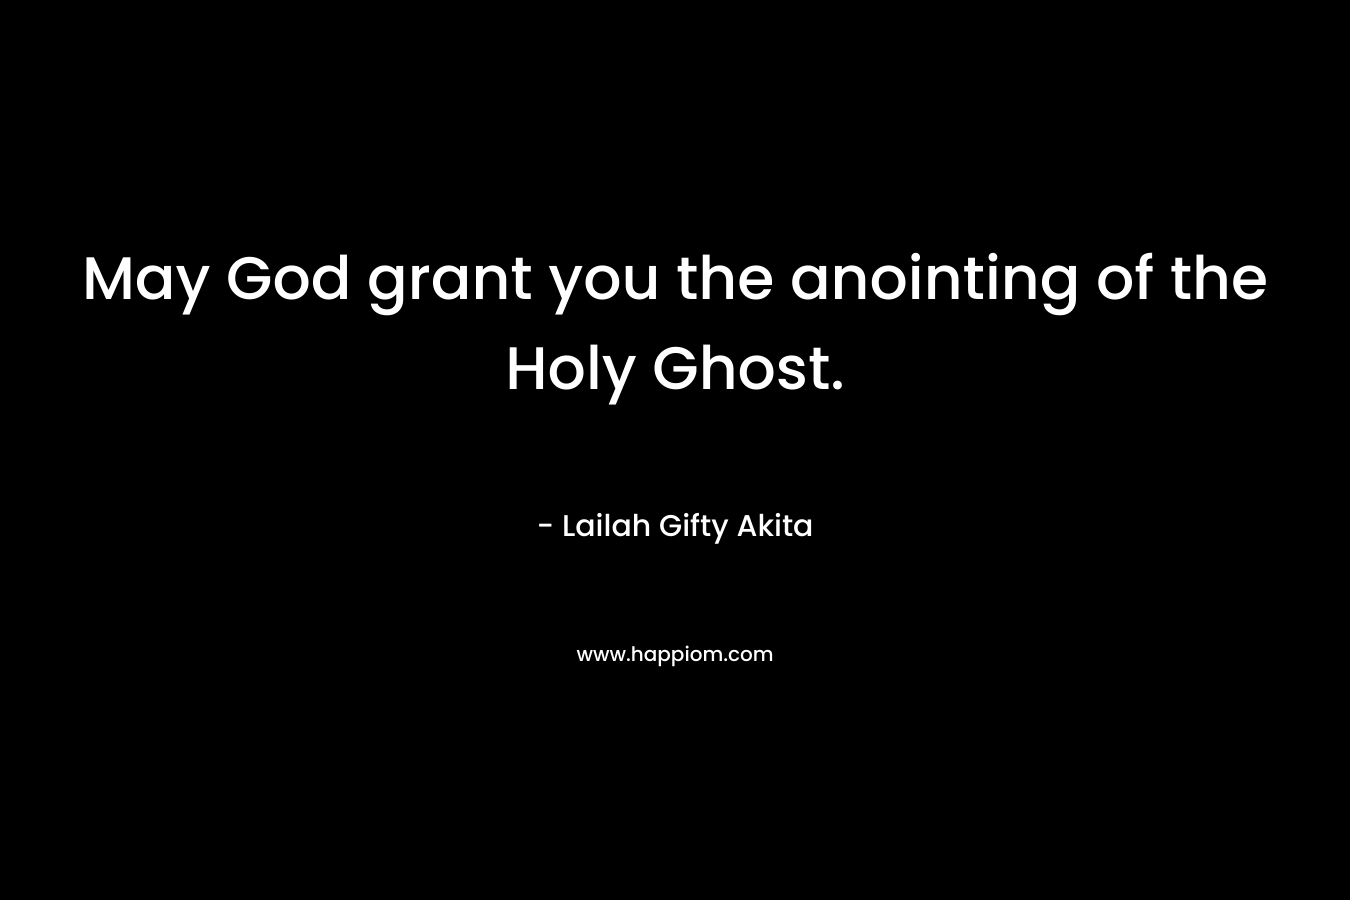 May God grant you the anointing of the Holy Ghost.